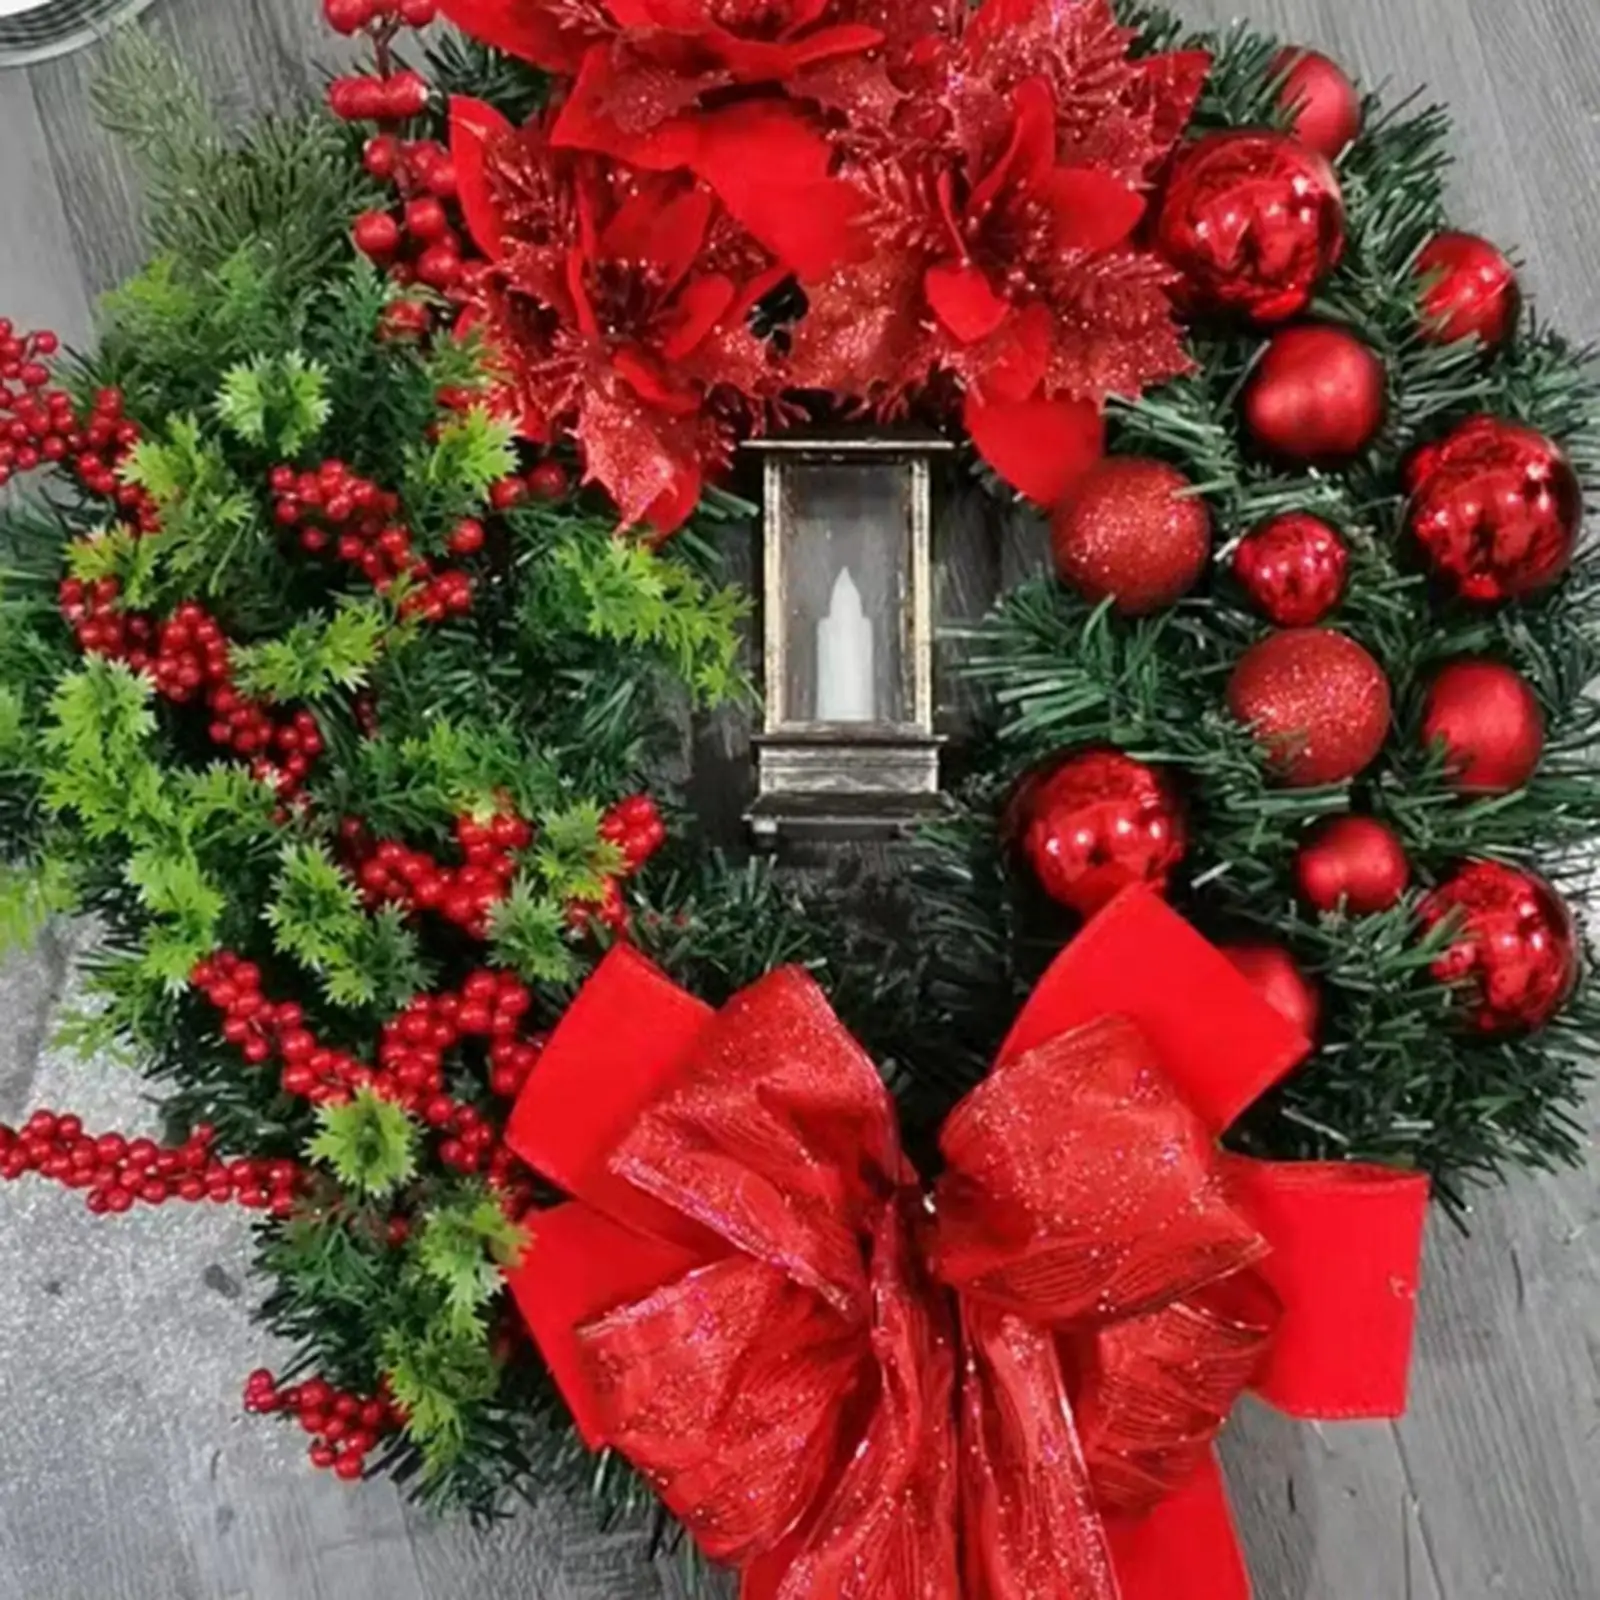 Xmas Wreath Hanging Christmas Garland for Winter Holiday Mantel Fireplace Decorations